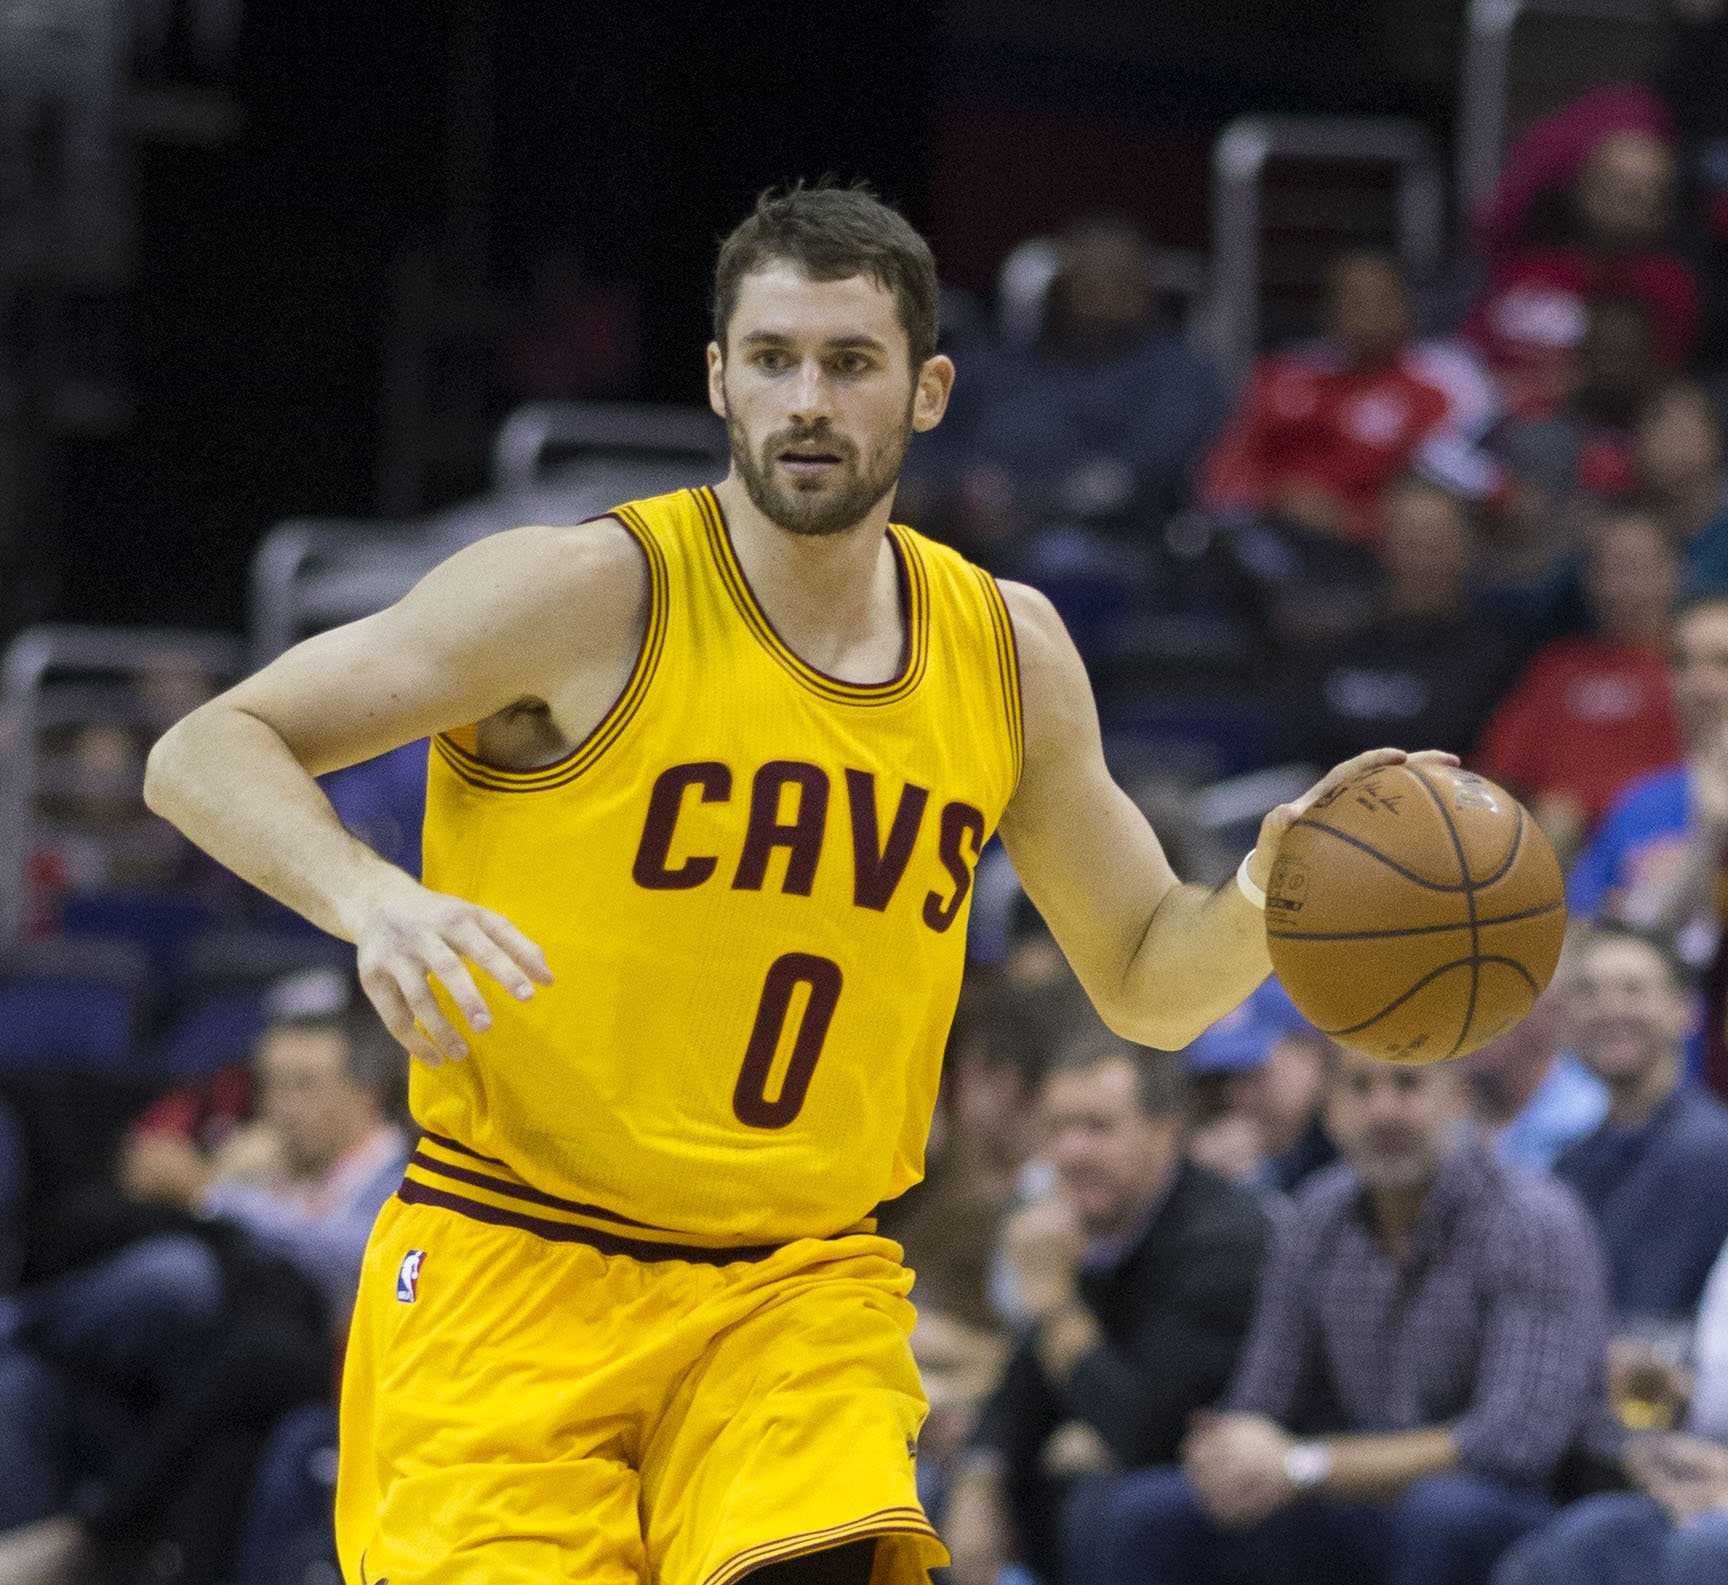 Kevin Love of the Cleveland Cavaliers in a game against the Washington Wizards at Verizon Center on November 21, 2014 in Washington, DC. | Photo: Keith Allison from Hanover, MD, USA, CC BY-SA 2.0, Wikimedia Commons